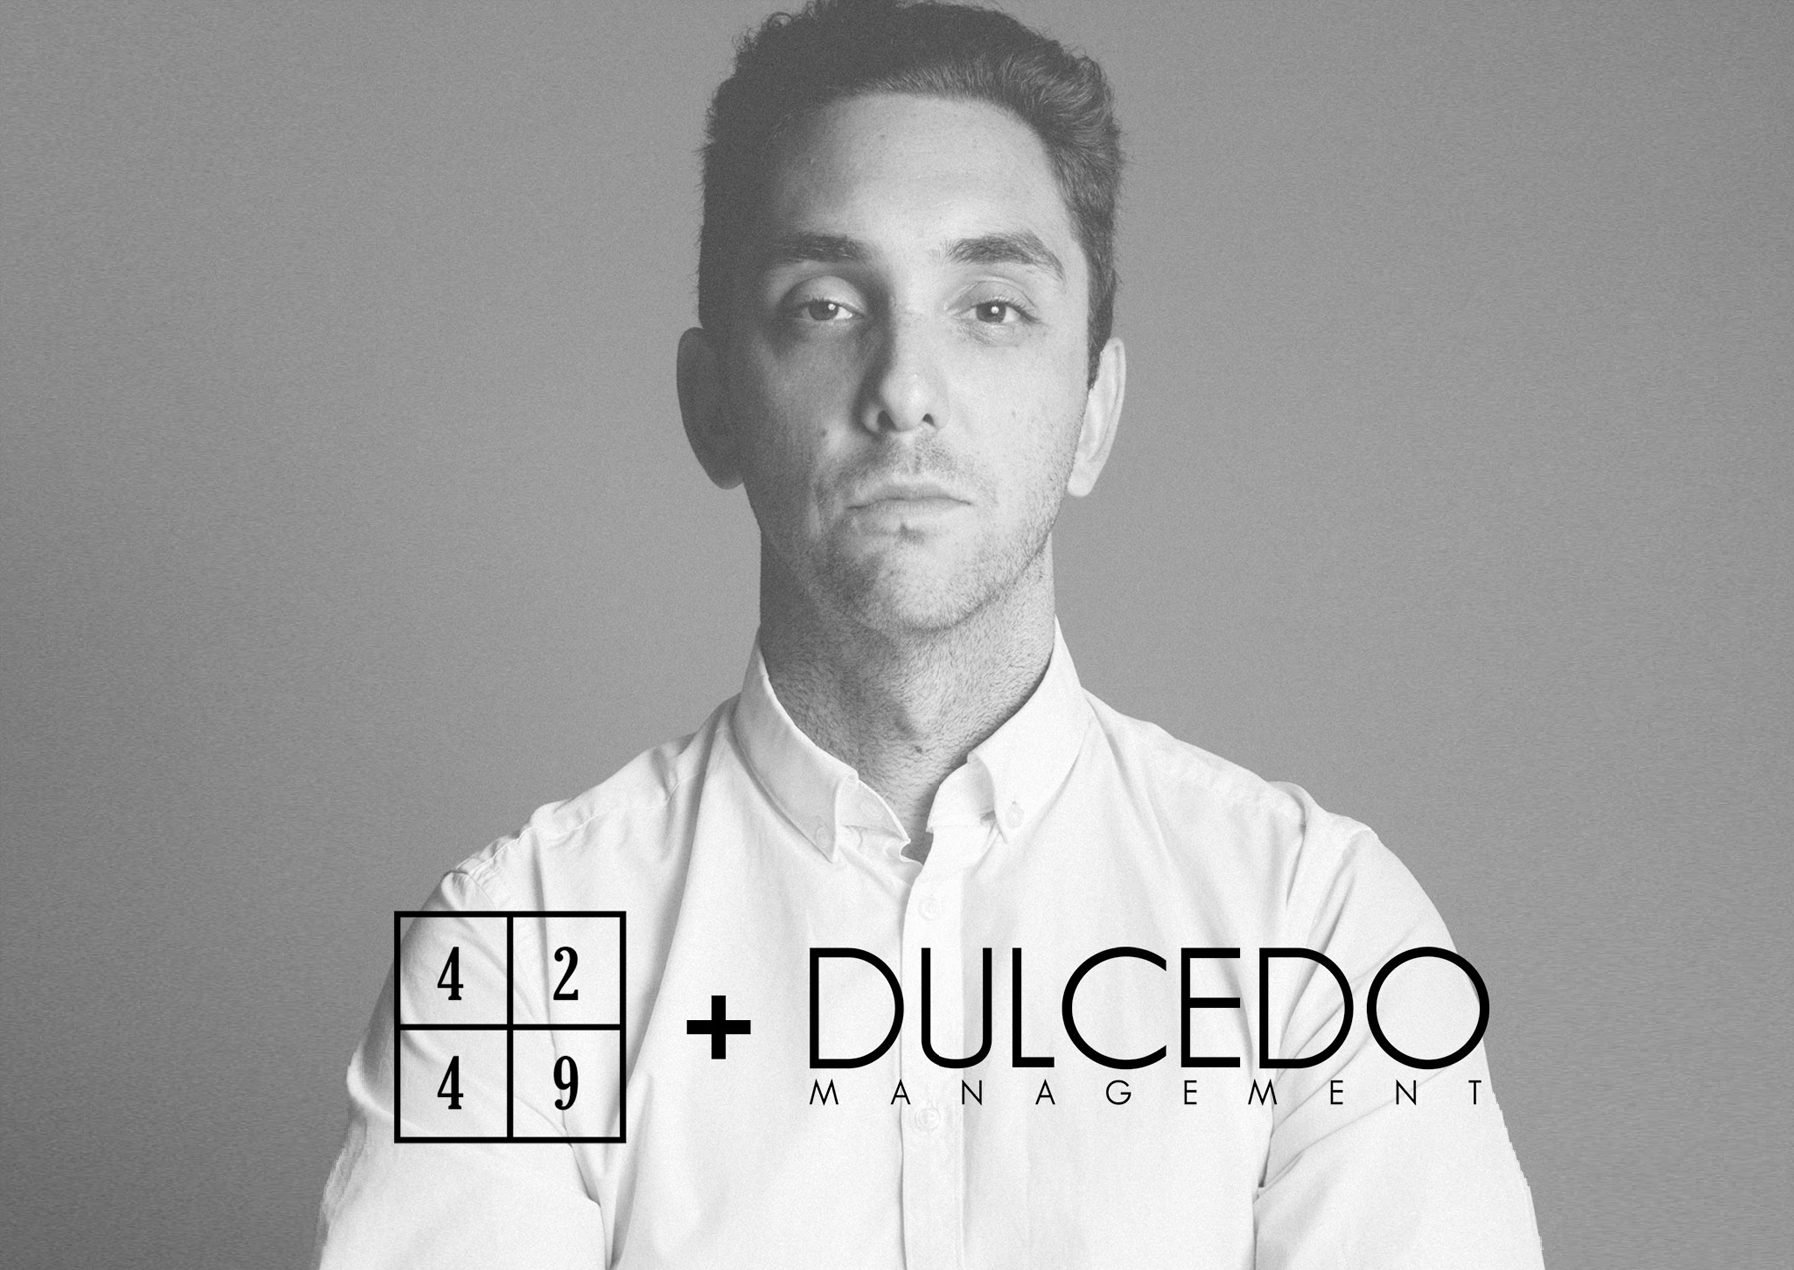 DULCEDO acquires 4249 Influencer relations agency